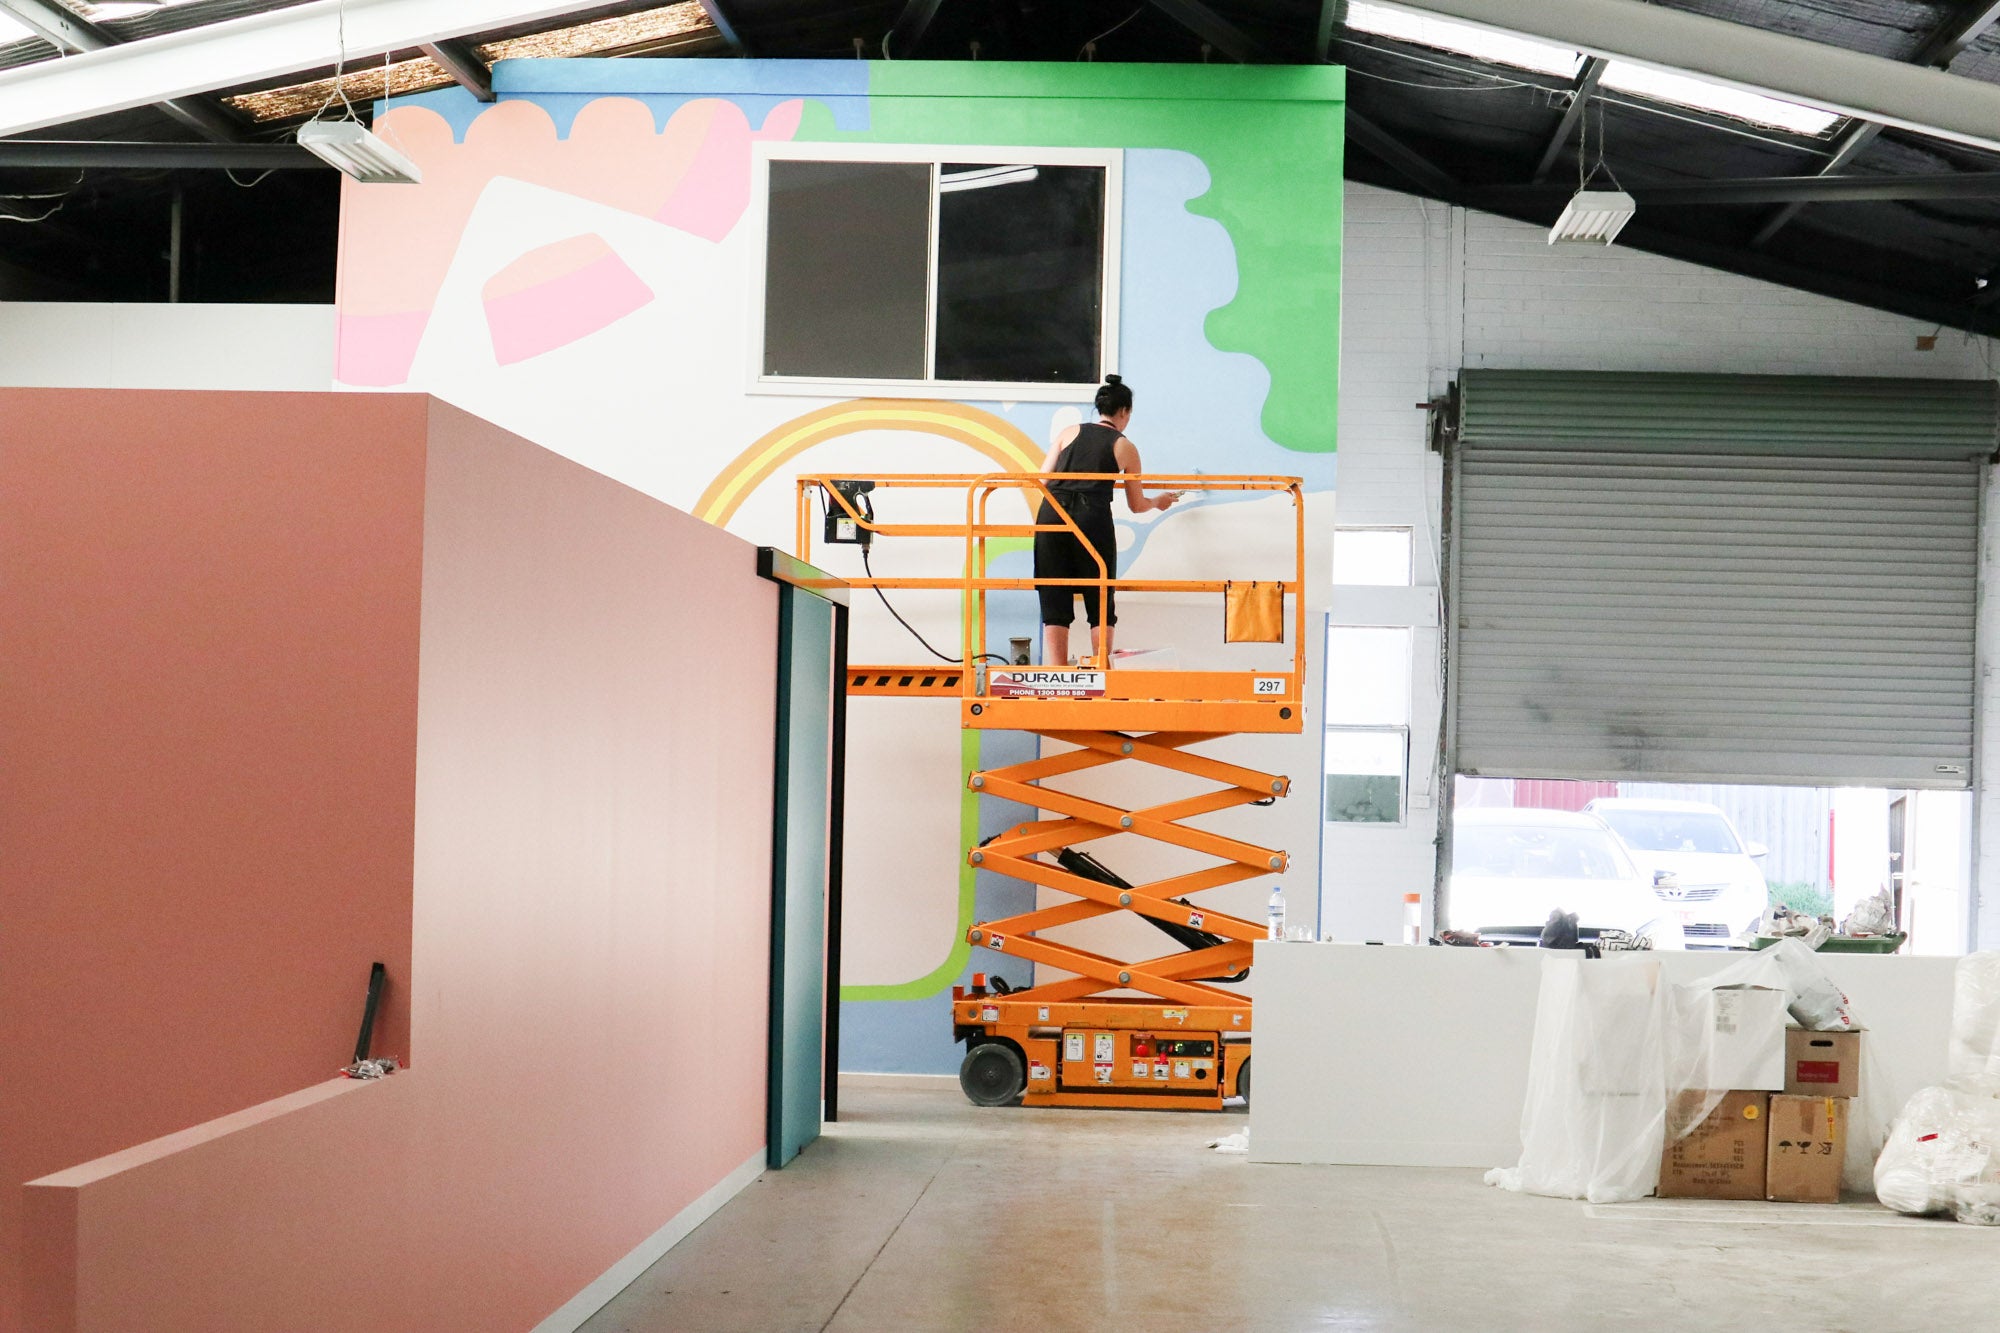 Deb McNaughton Artist - working on Massive wall mural - painting on forklift - Zudis -  Melbourne